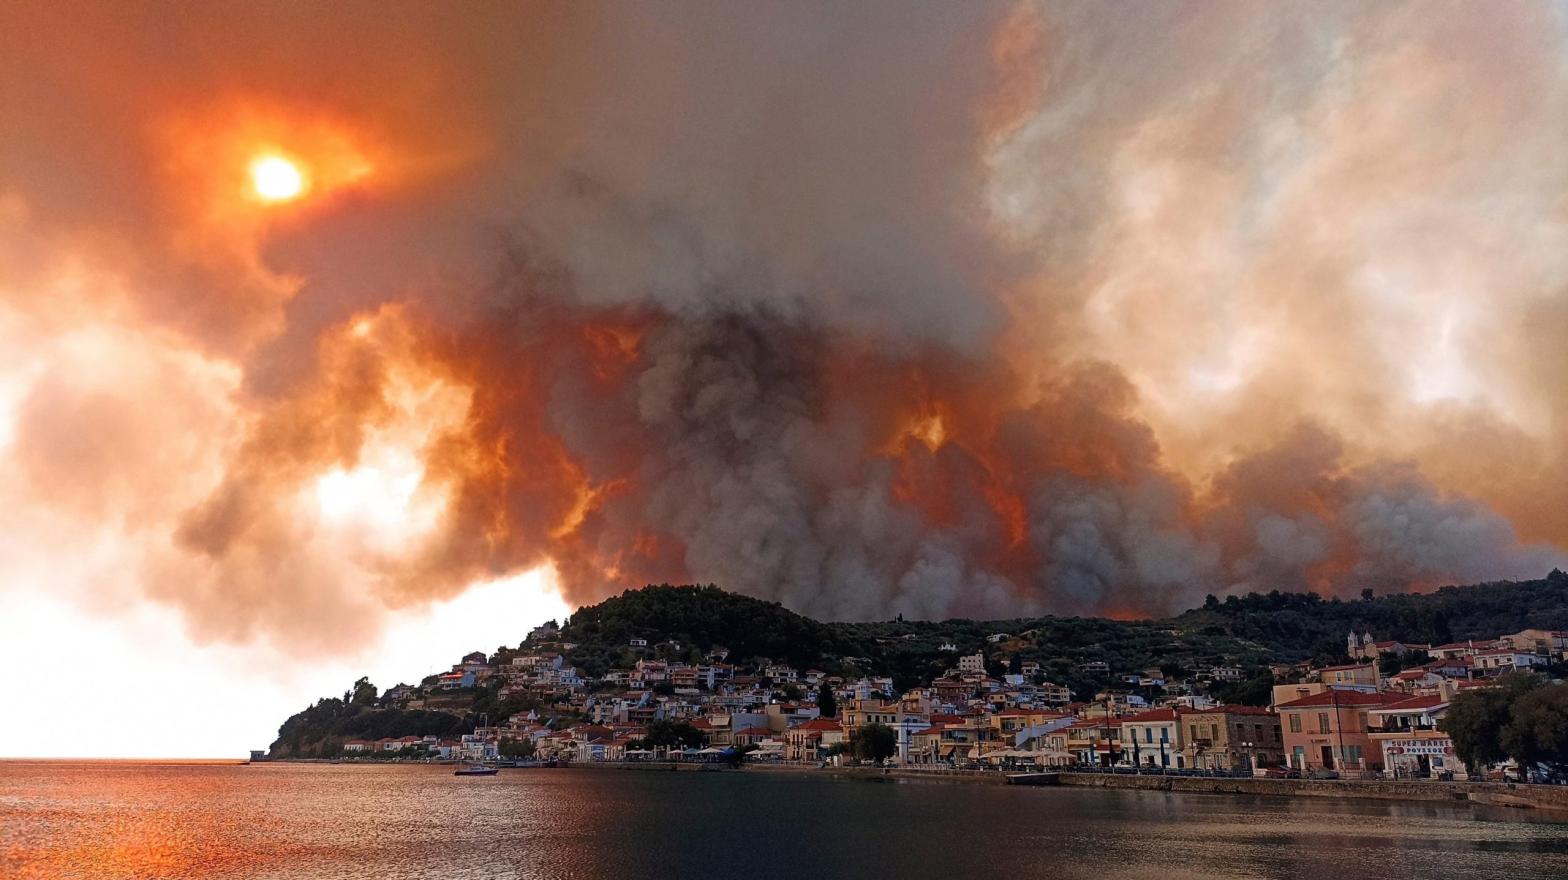 Flames burn on the mountain near Limni village on the island of Evia, about 160 kilometers (161 km) north of Athens, Greece, Tuesday, Aug. 3, 2021. (Photo: Michael Pappas, AP)